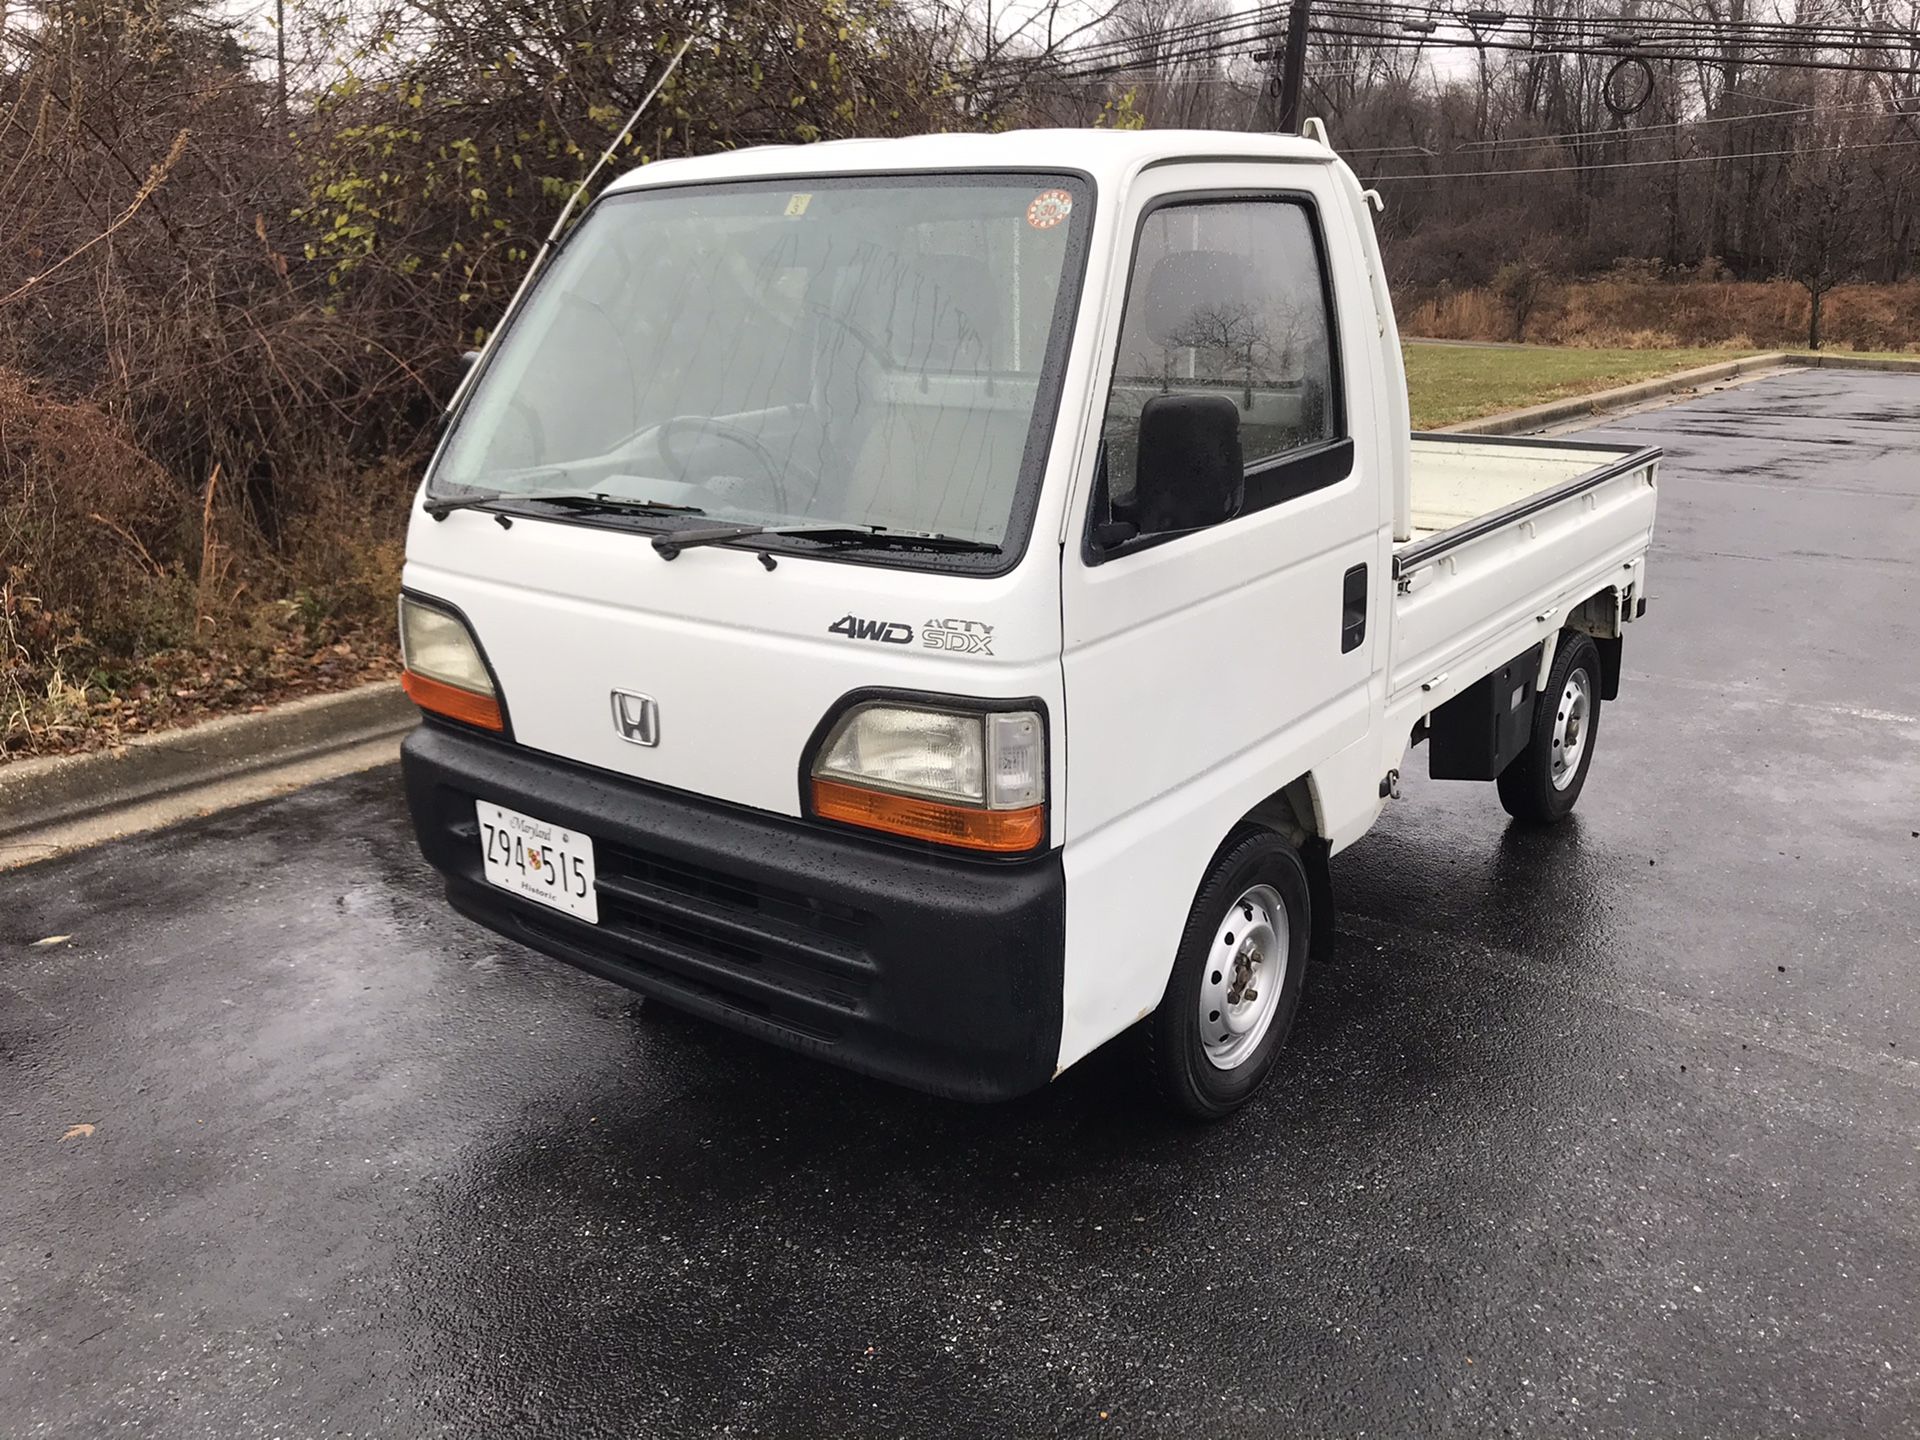 Honda 4WD MINITRUCK - Street Legal - Great for farms and Hunting too. Better then a Gator